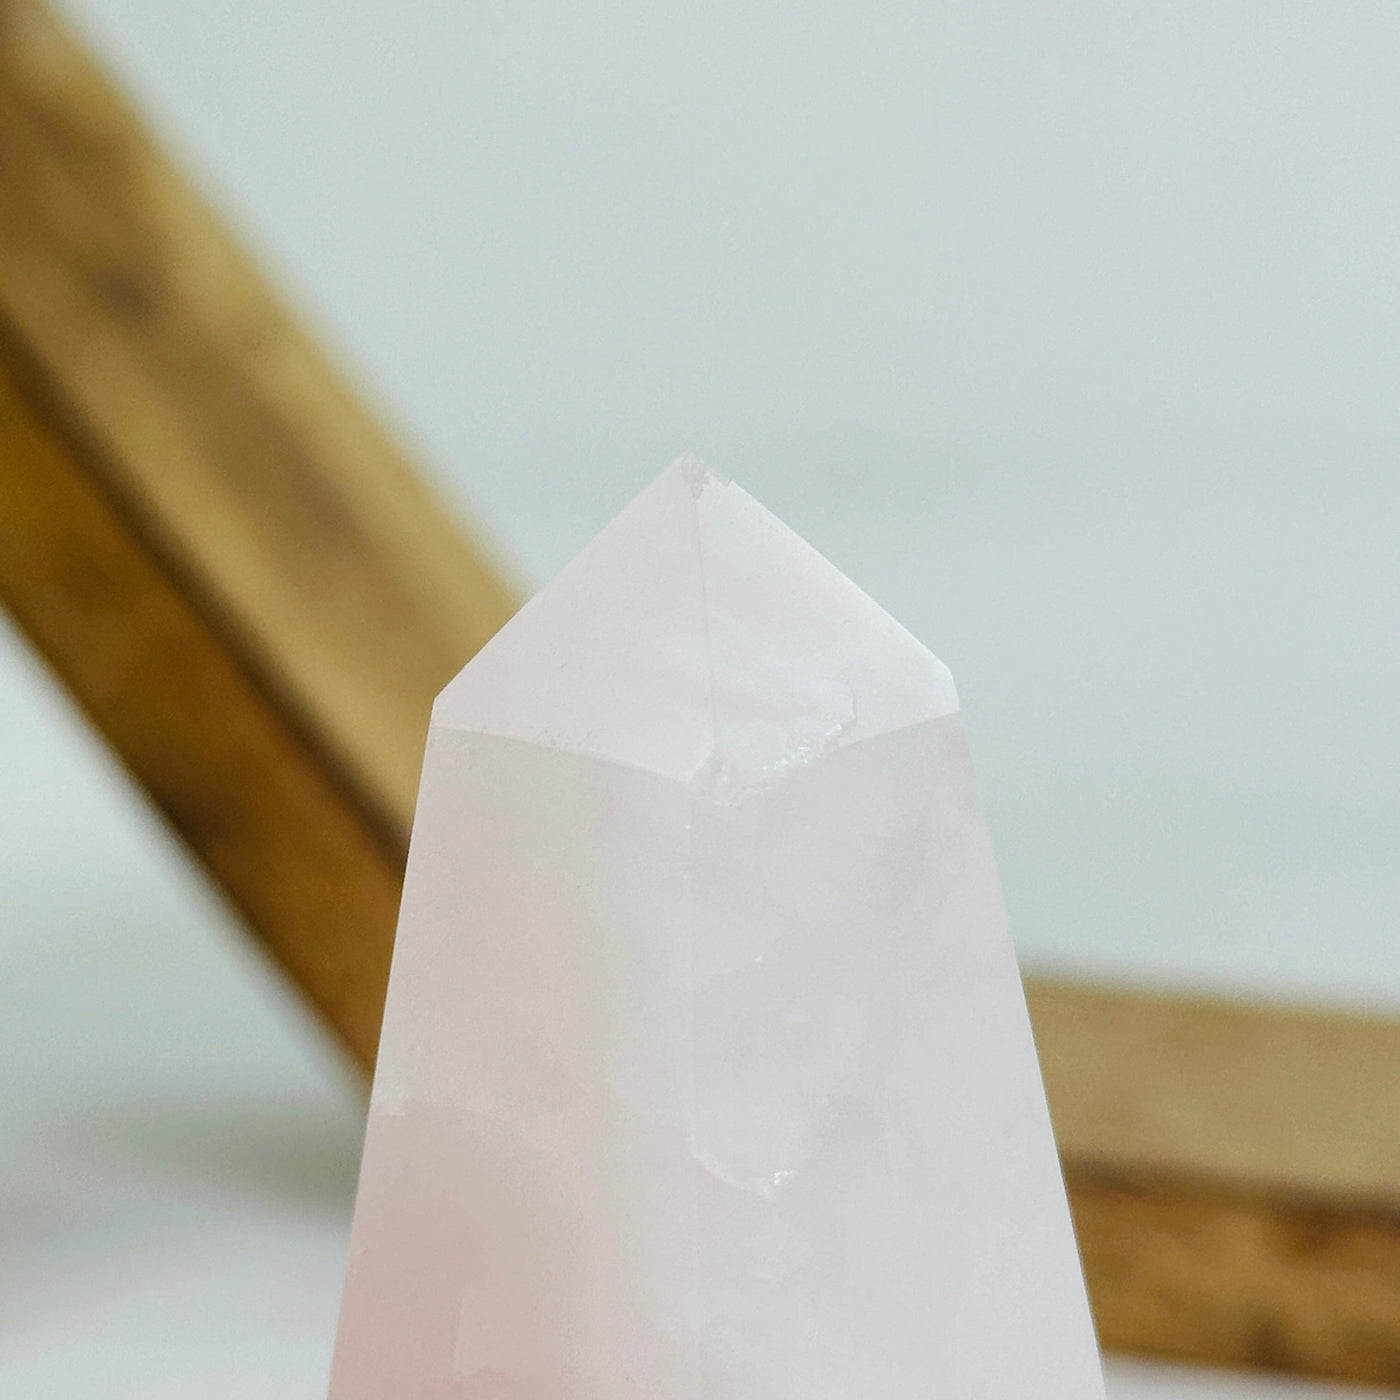 rose quartz polished tower with decorations in the background